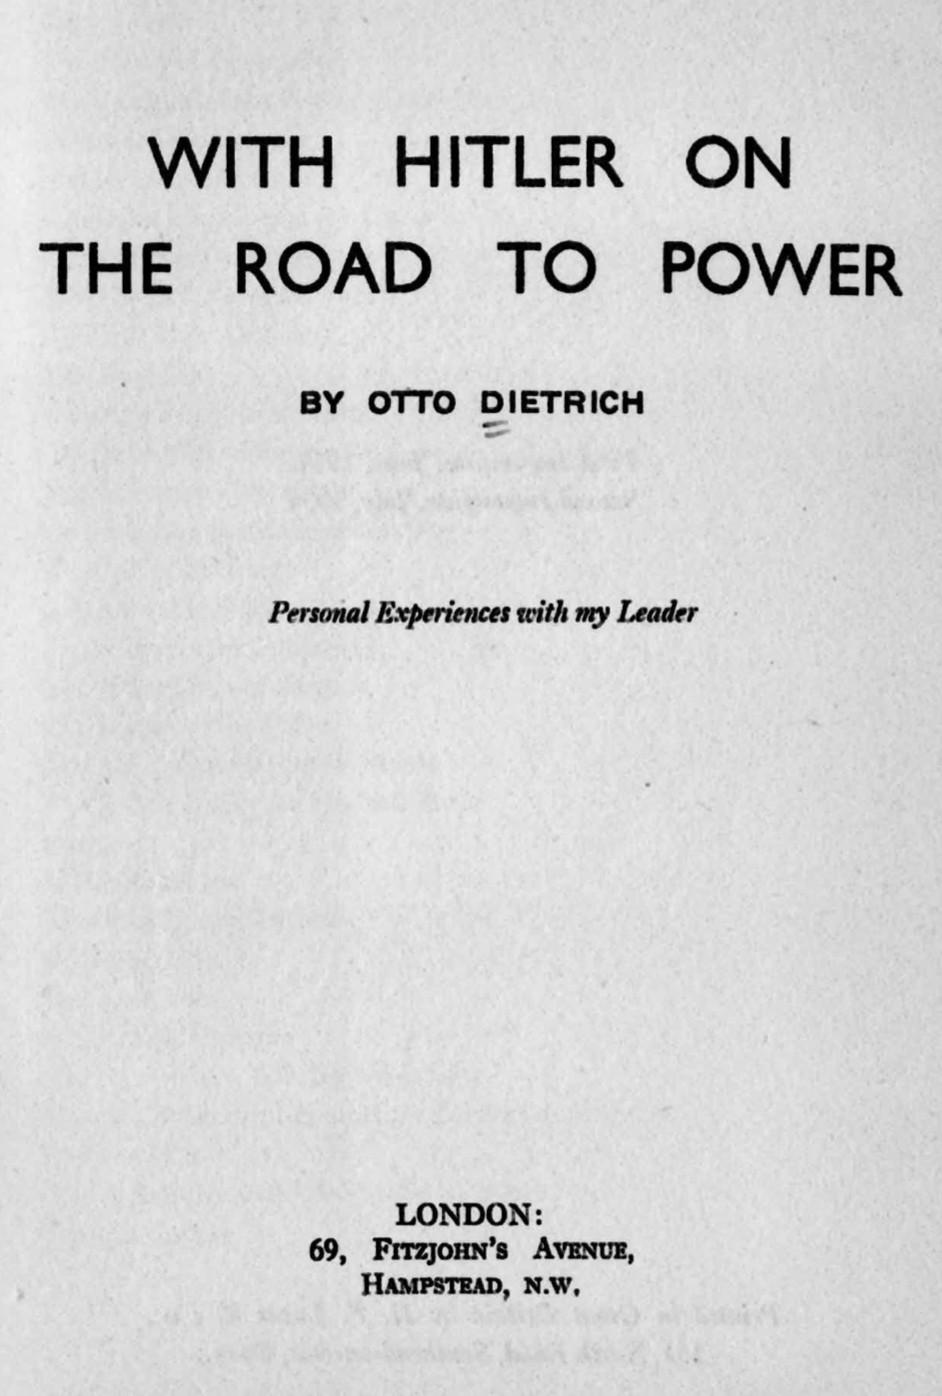 With Hitler on the Road to Power - Personal Experiences With My Leader (1934) by Otto Dietrich